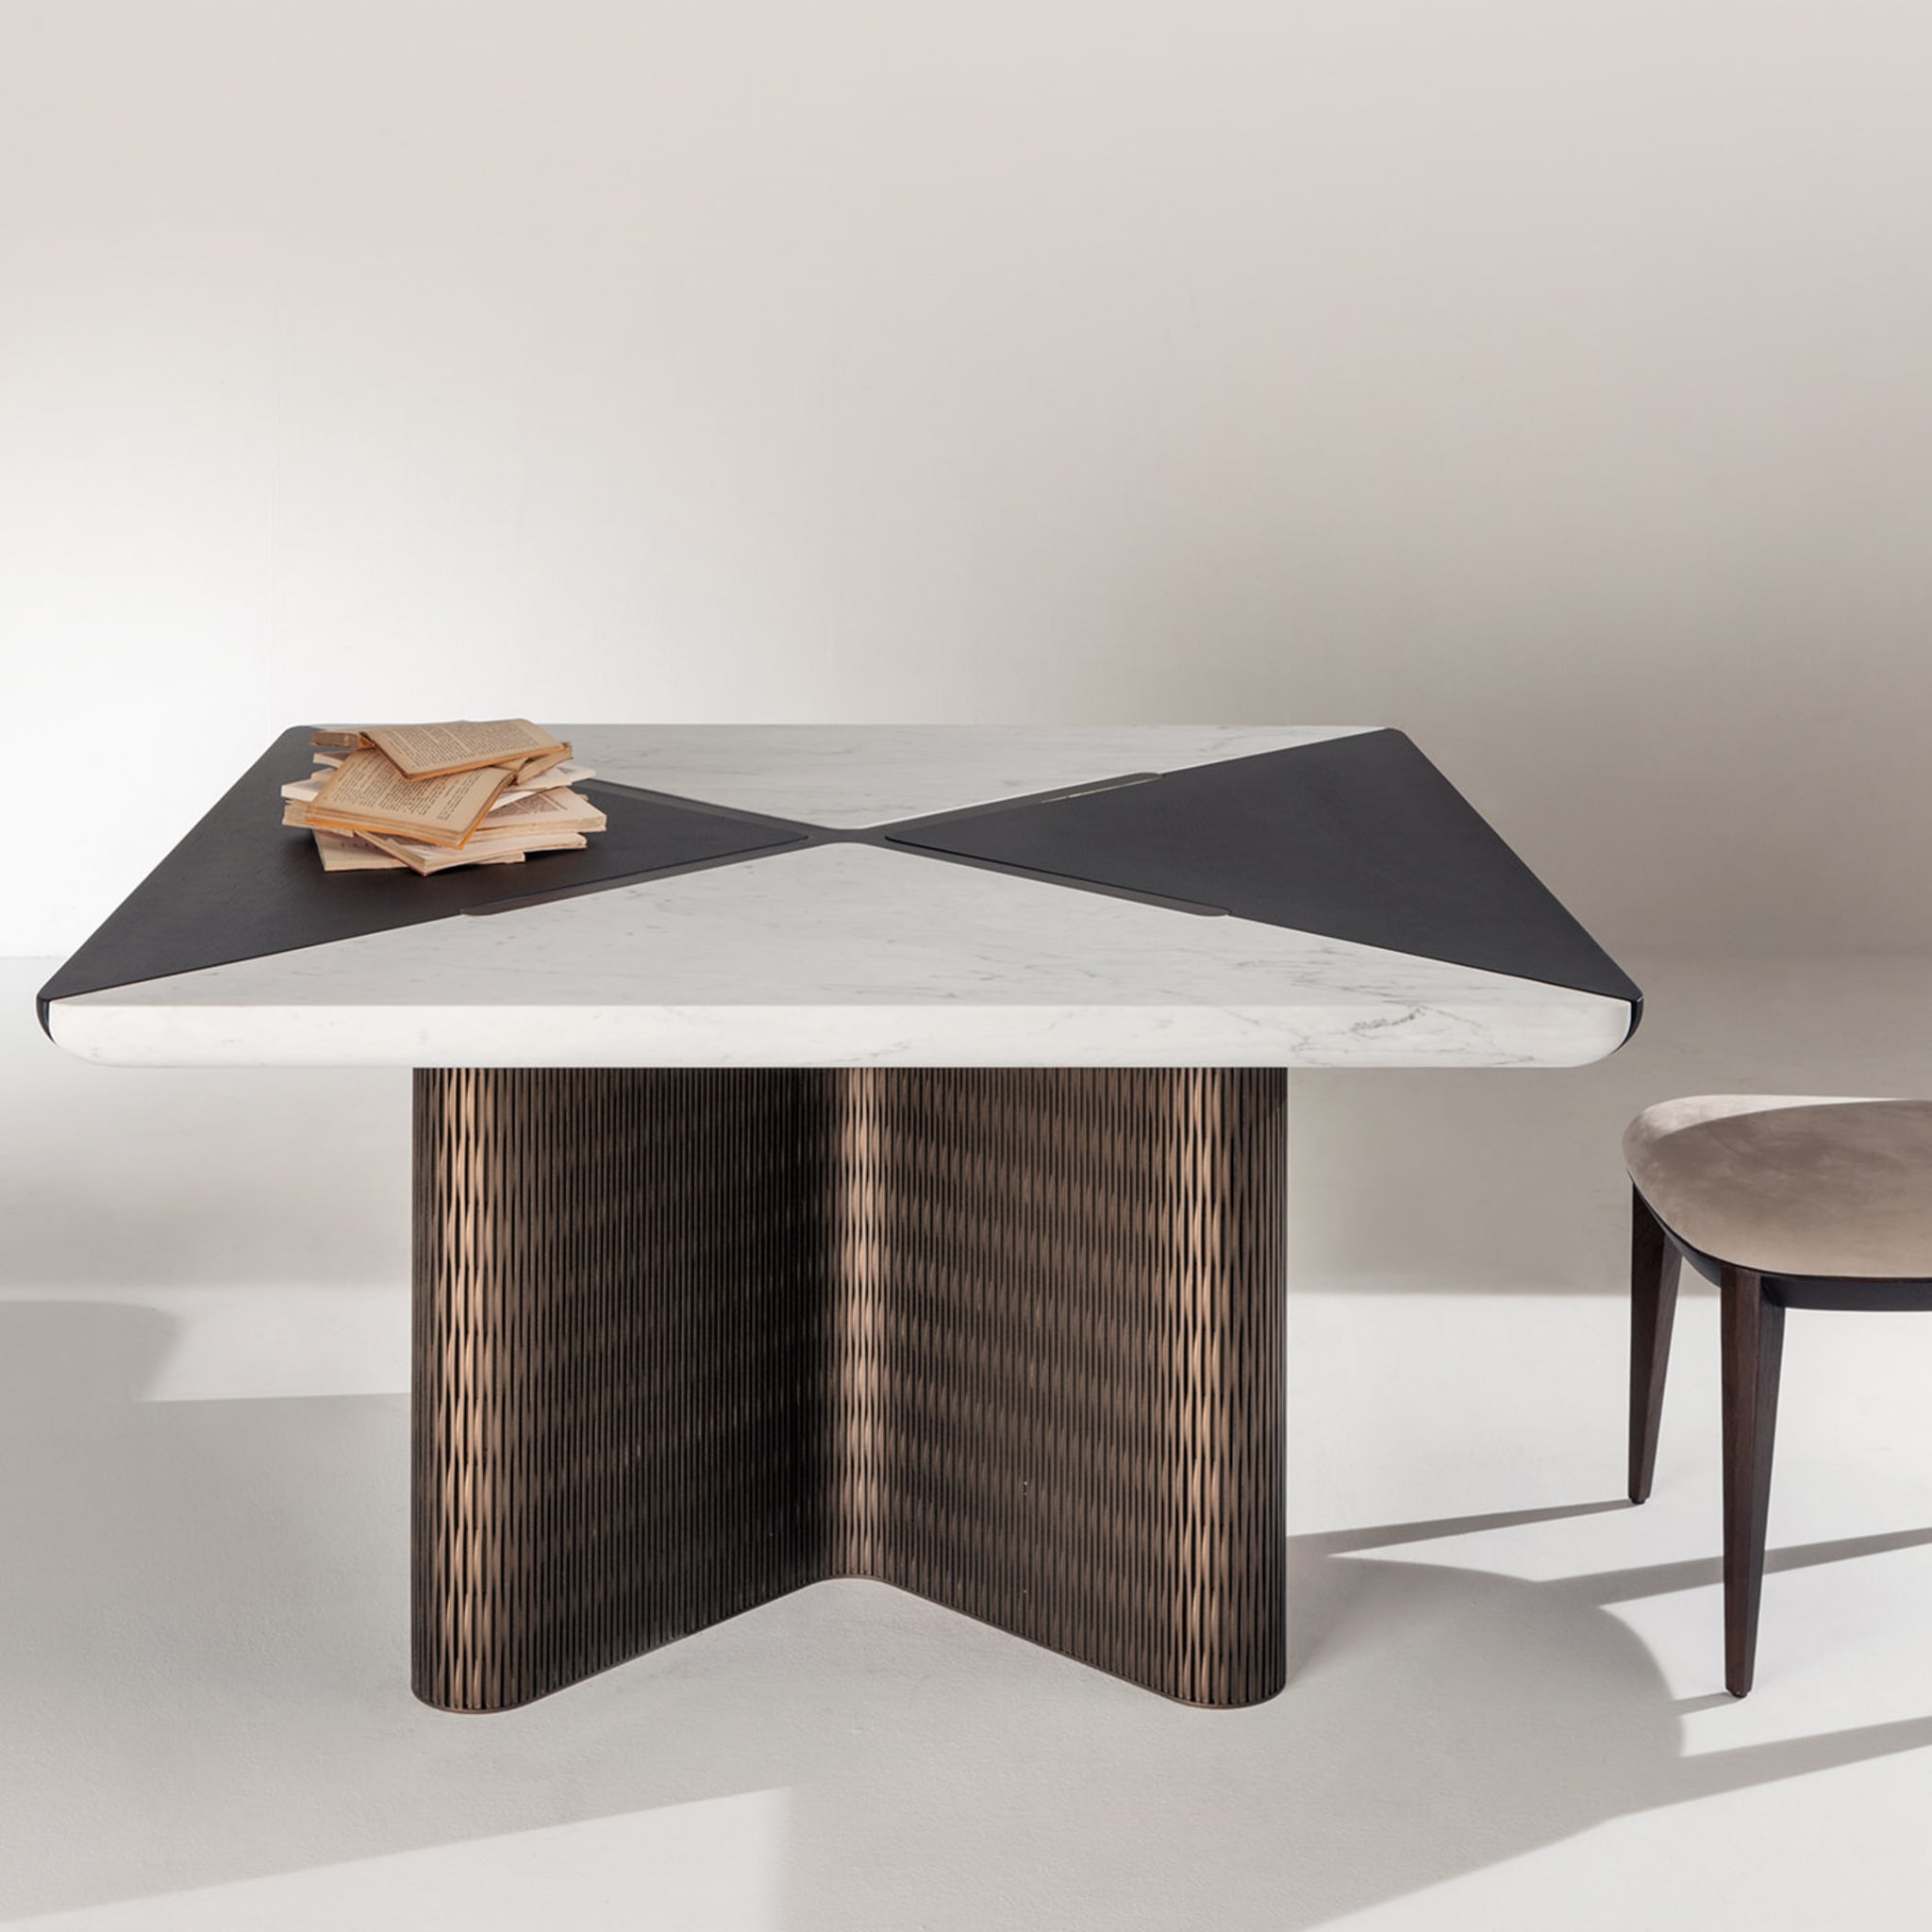 Infinity Square Dining Table by Cesare Arosio - Alternative view 2